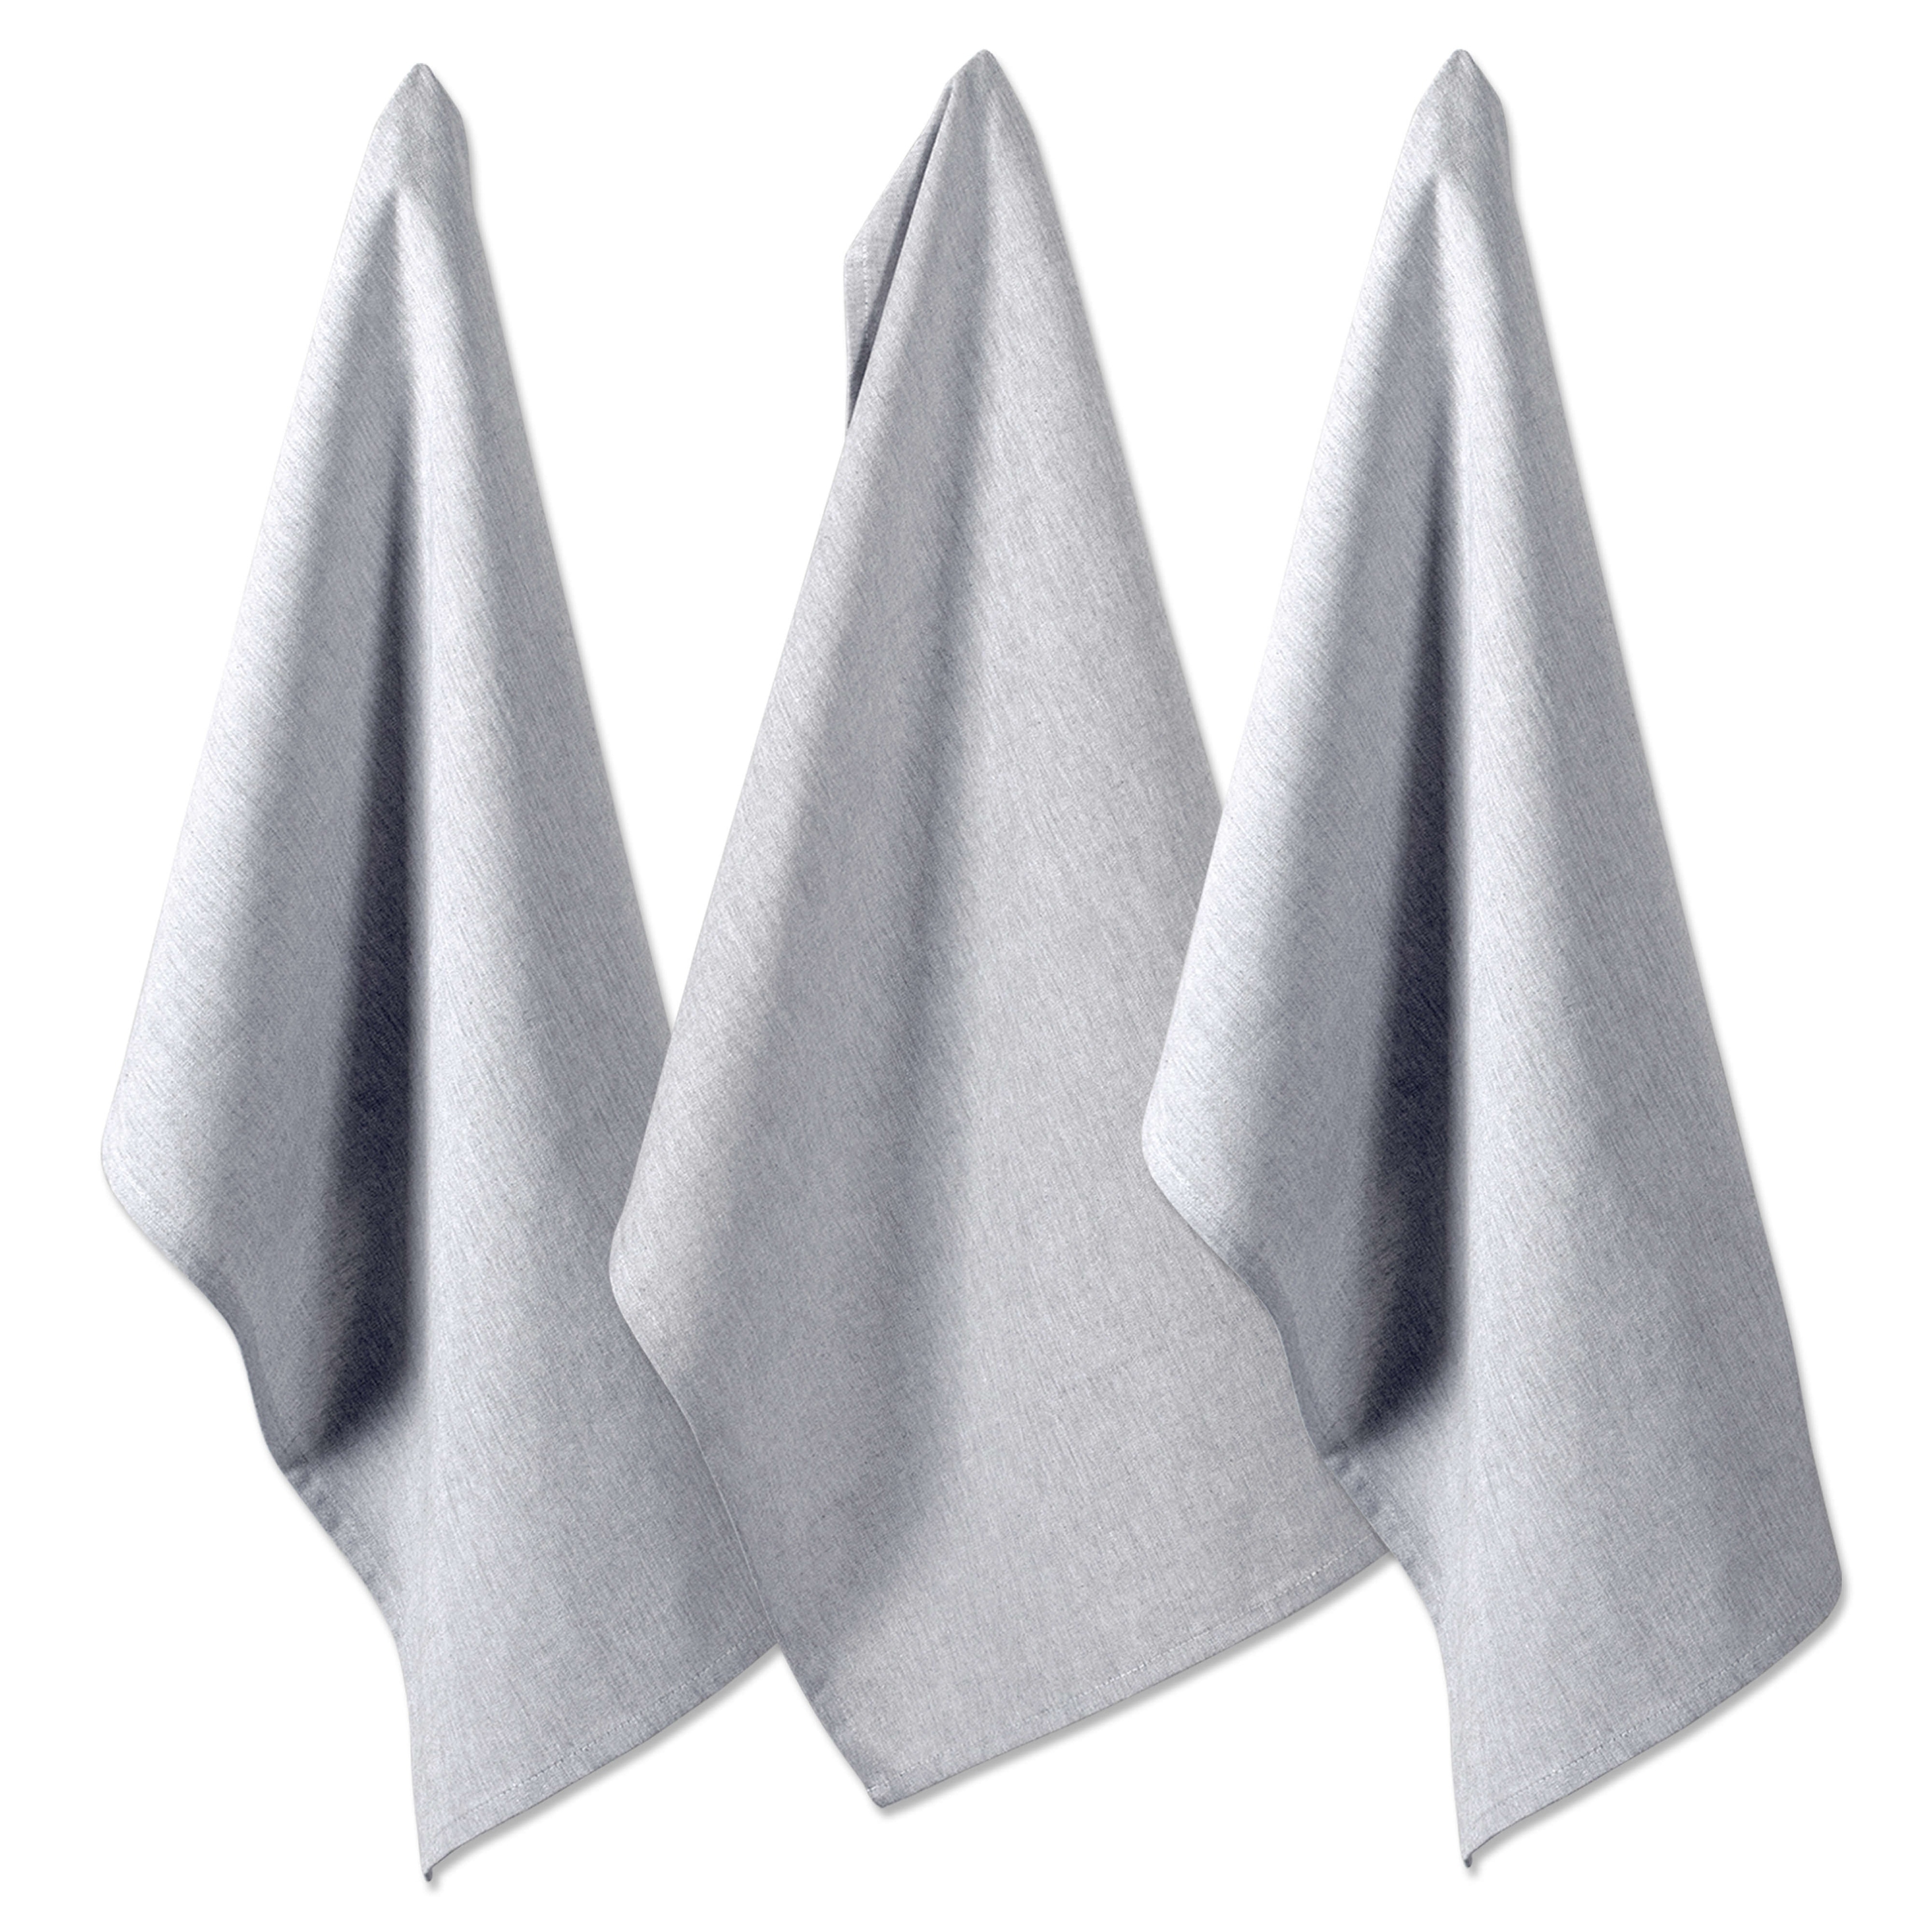 https://ak1.ostkcdn.com/images/products/21723526/Design-Imports-Solid-Chambray-Dishtowel-Set-of-3-30-inches-long-x-20-inches-wide-ce95a0de-c4be-4d93-a586-5156fa6292f7.jpg